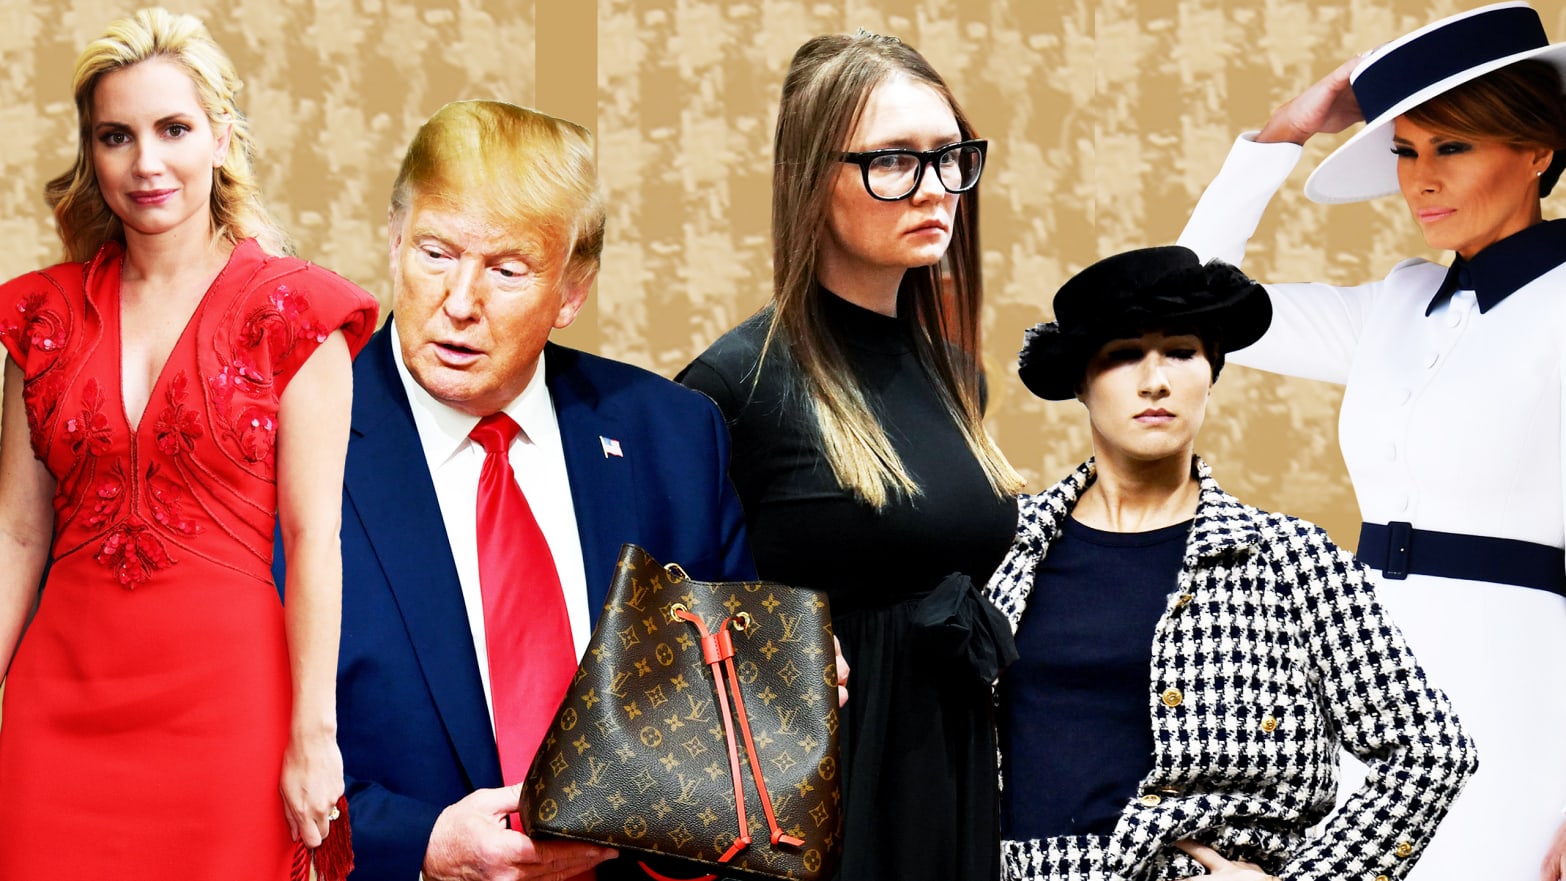 From Kylie Jenner to Melania and Ivanka Trump, the 10 Most